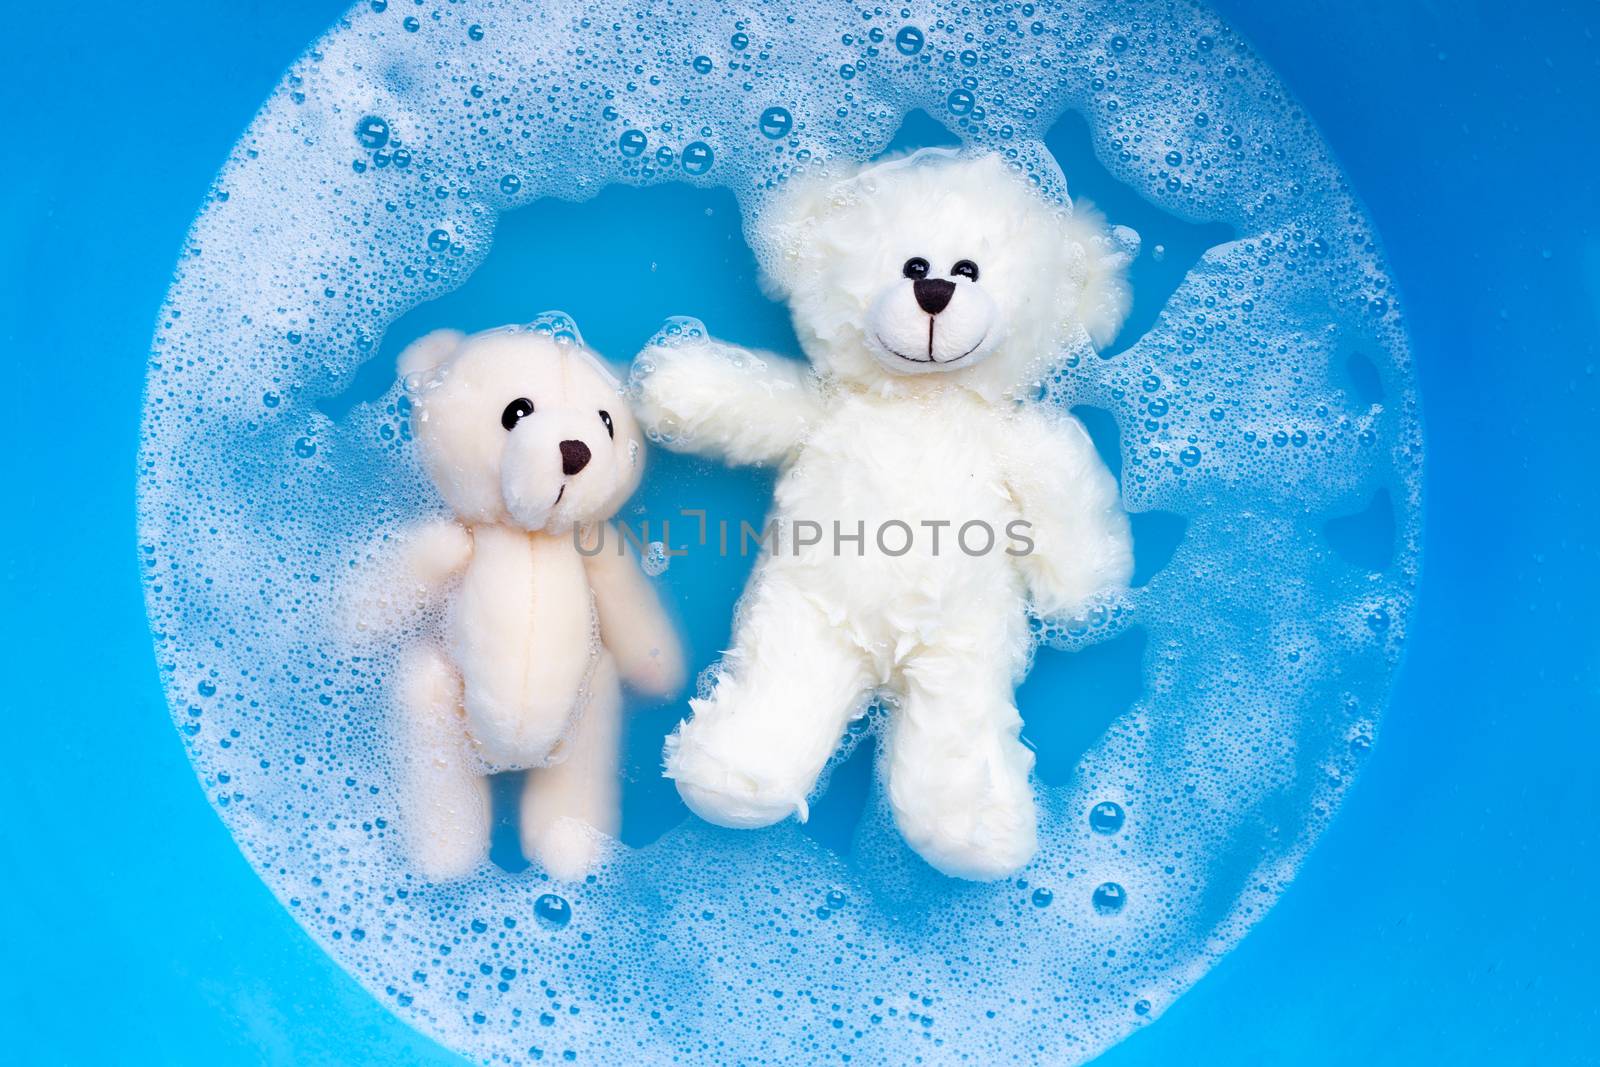 Soak  two toy bears in laundry detergent water dissolution befor by Bowonpat